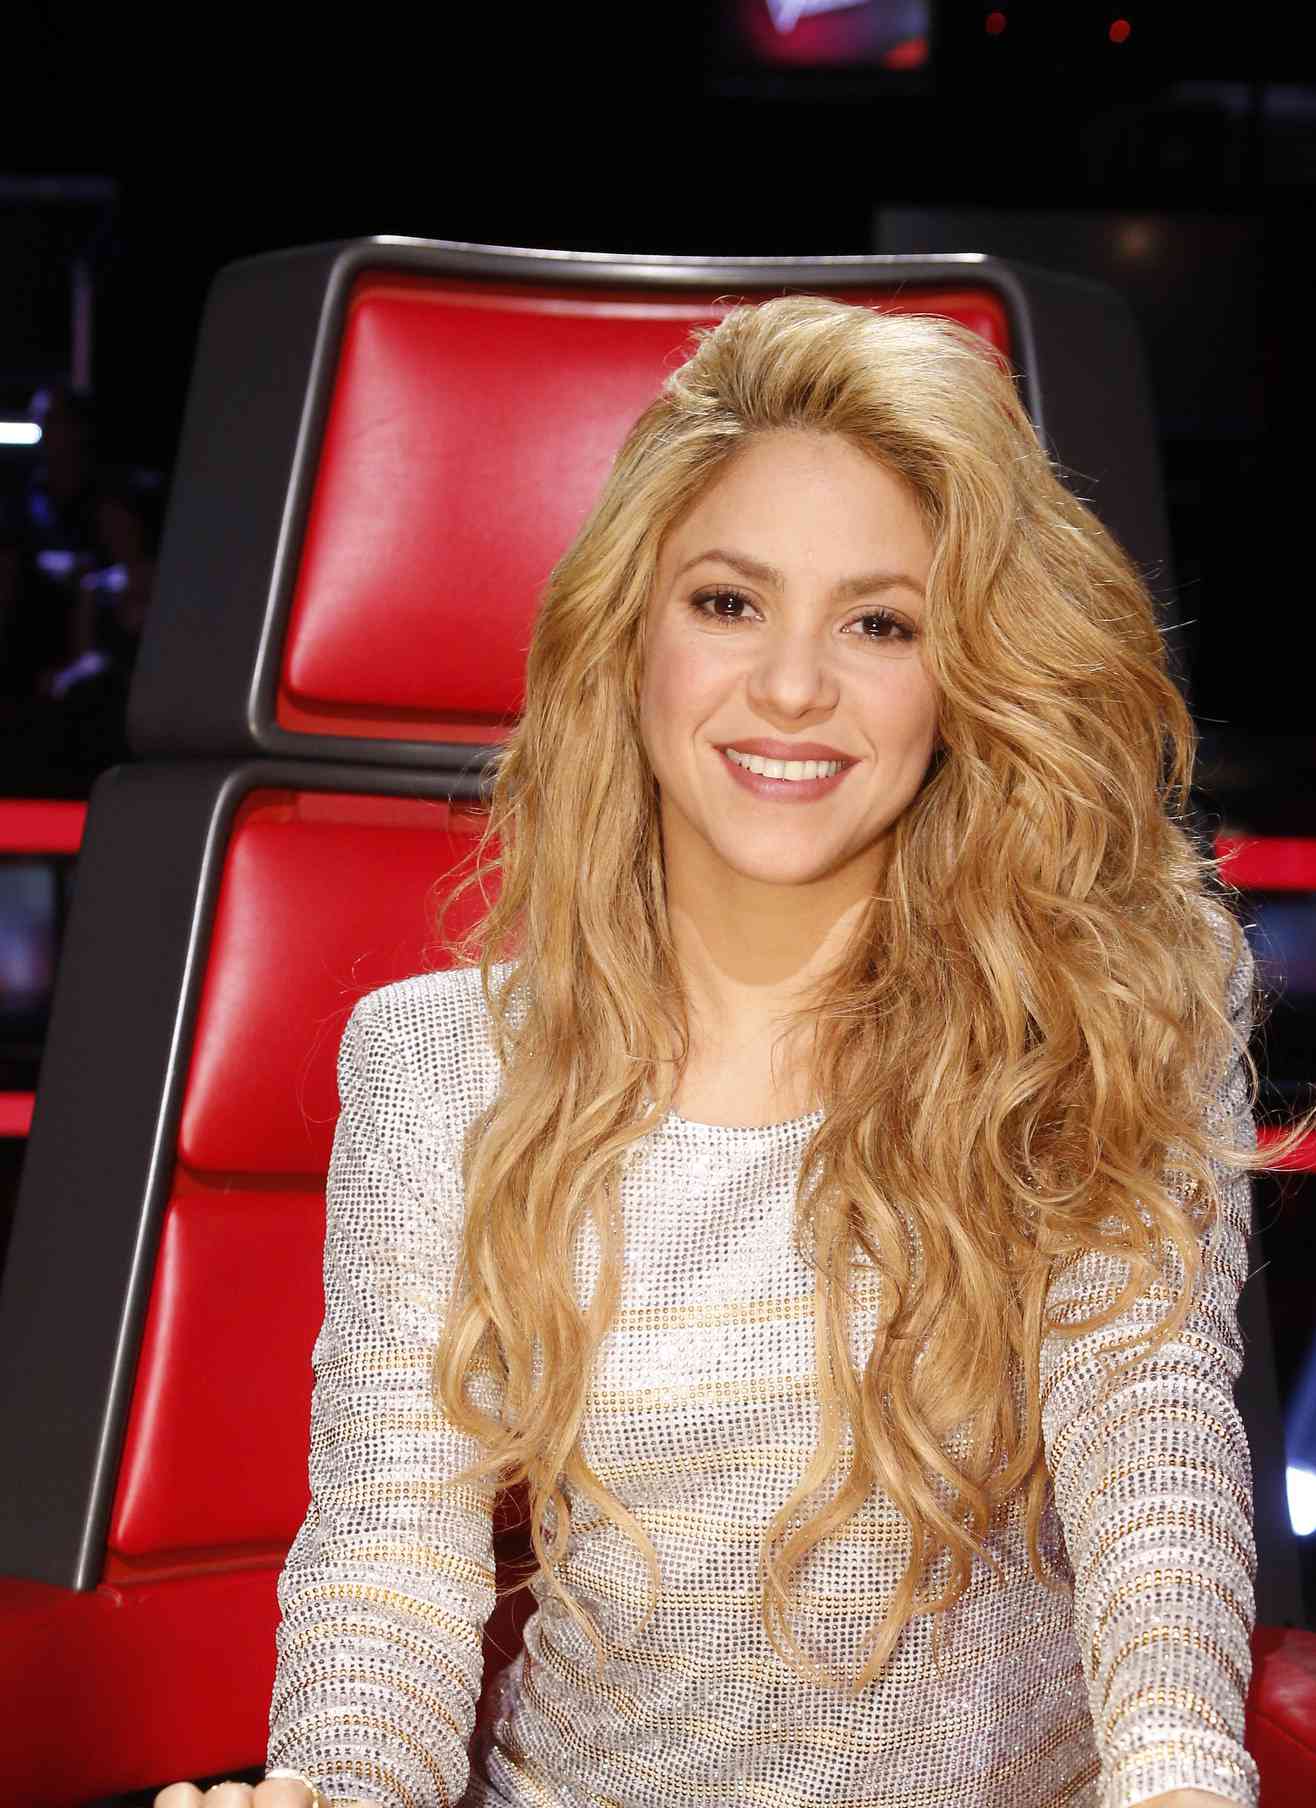 Shakira in The Voice Judge Chair